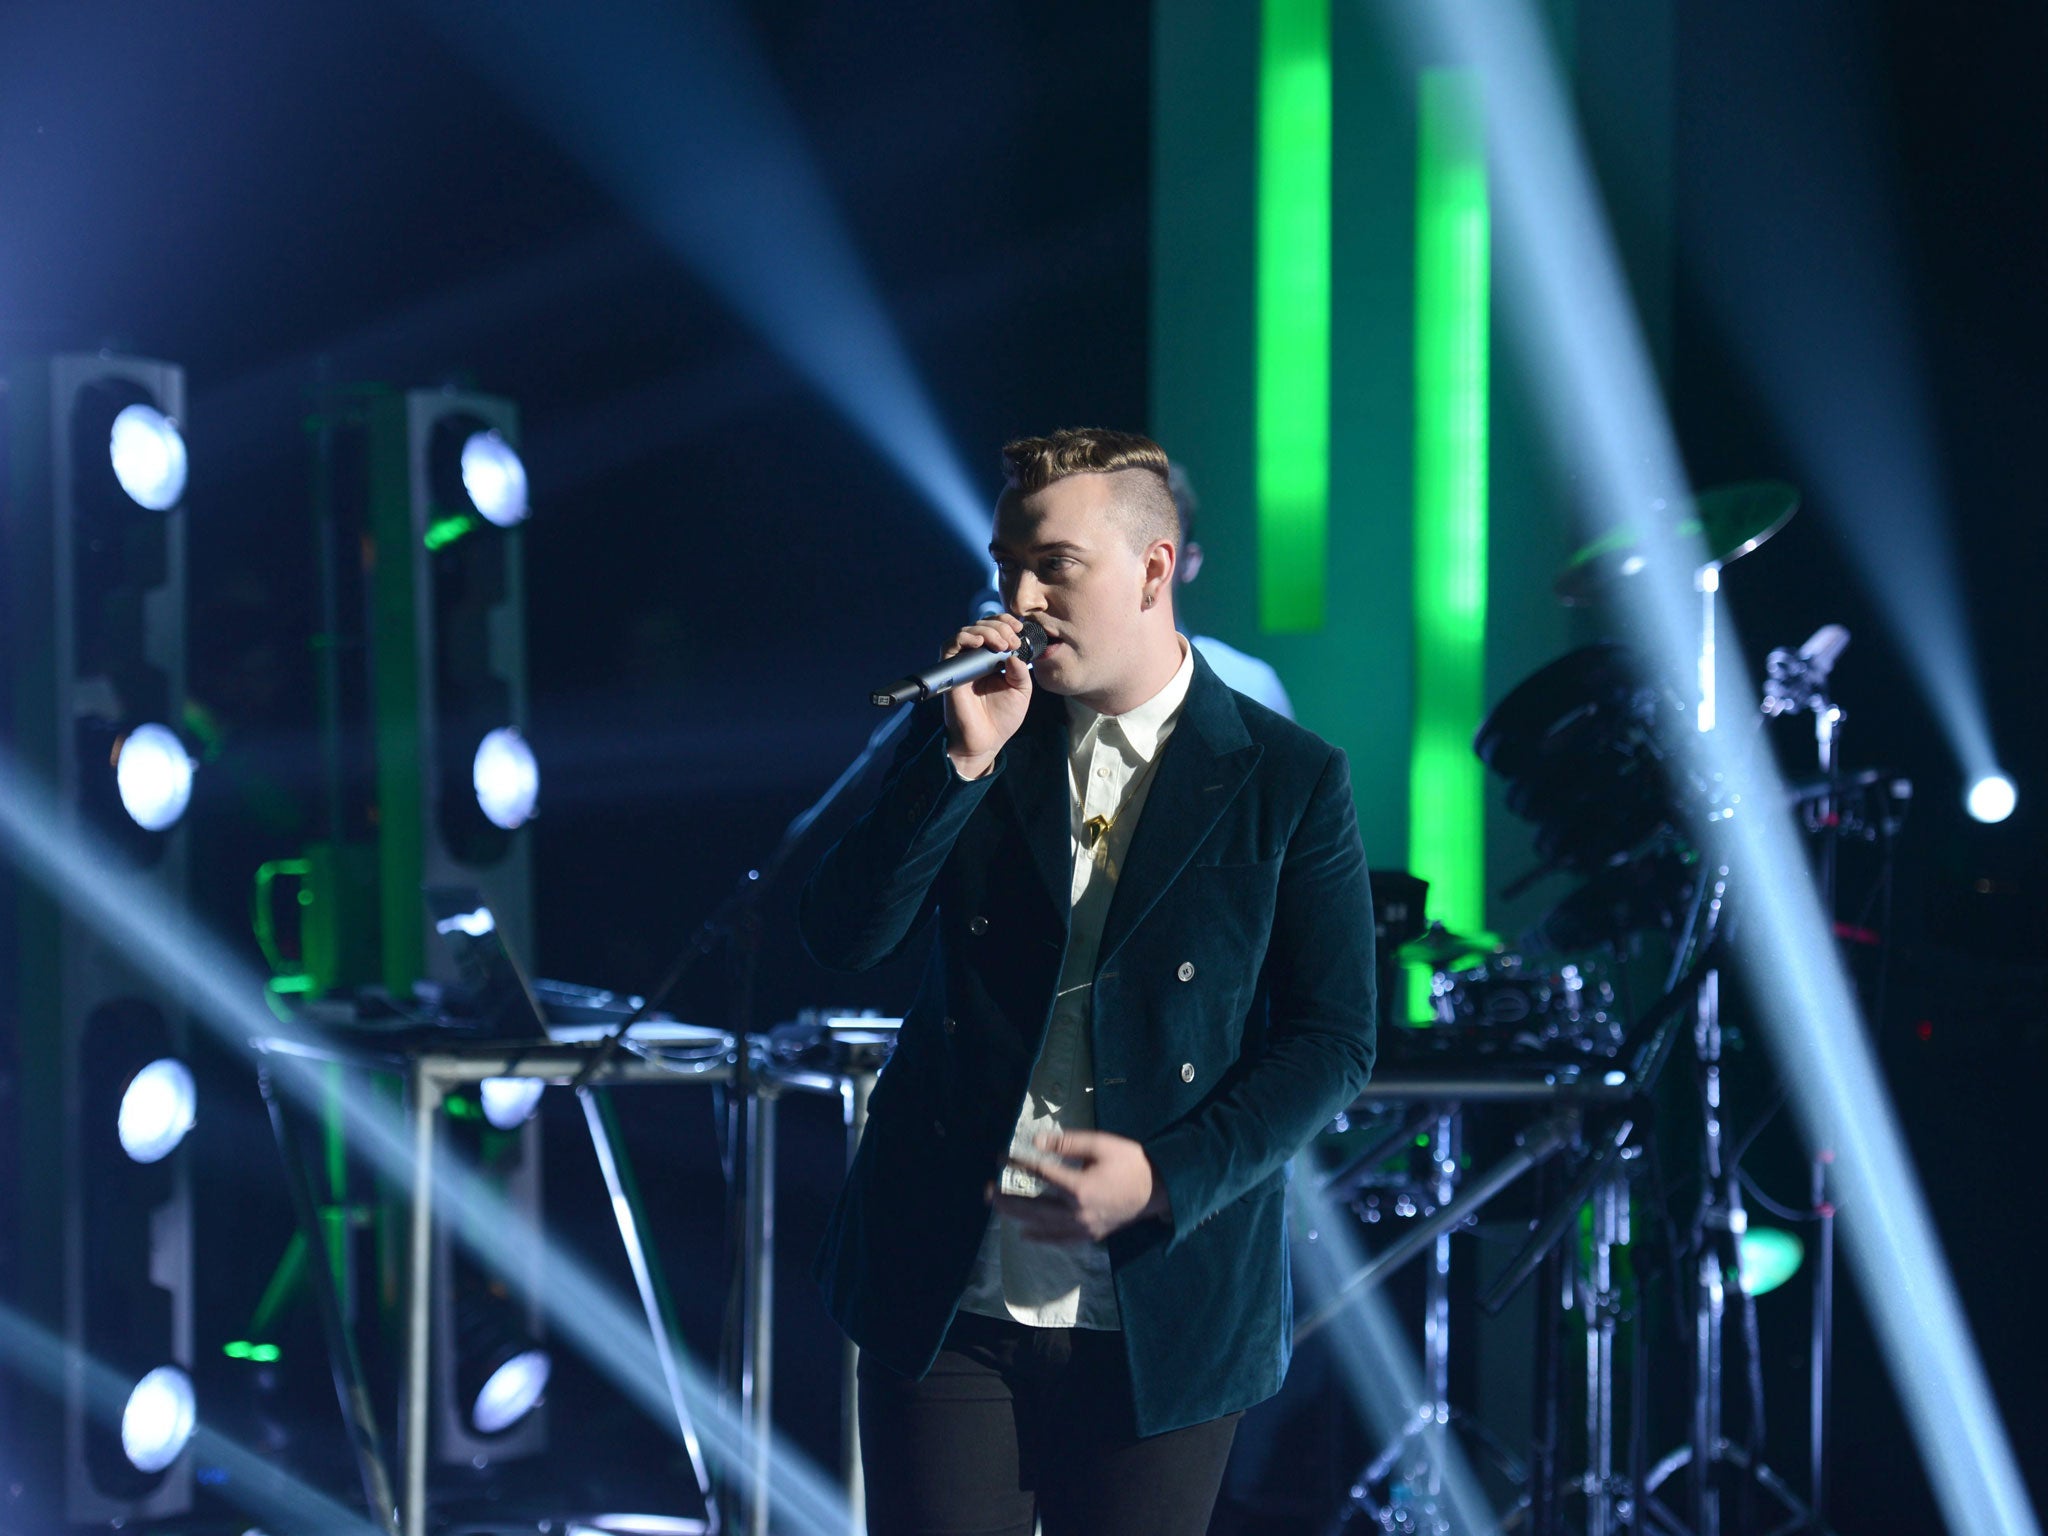 With a richly tonal, soulful voice, Sam Smith far belies his 22 years